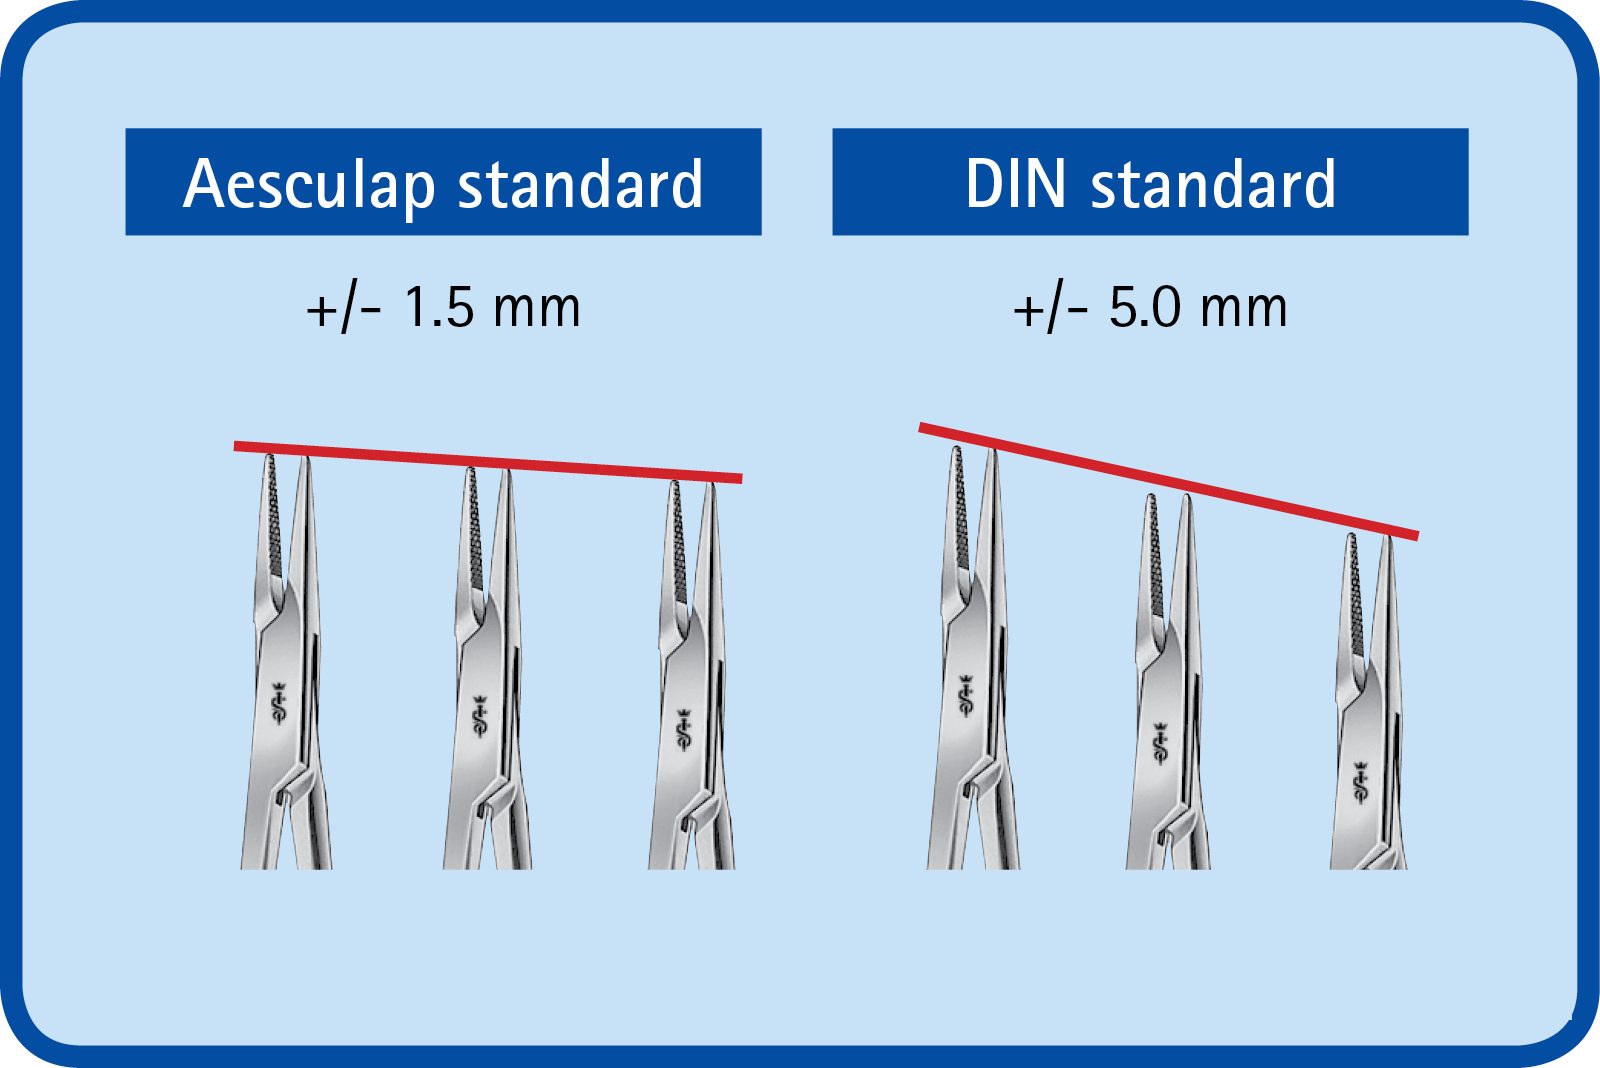 Comparison visual of DIN surgical instruments standard vs Aesculap self-imposed tighter standard